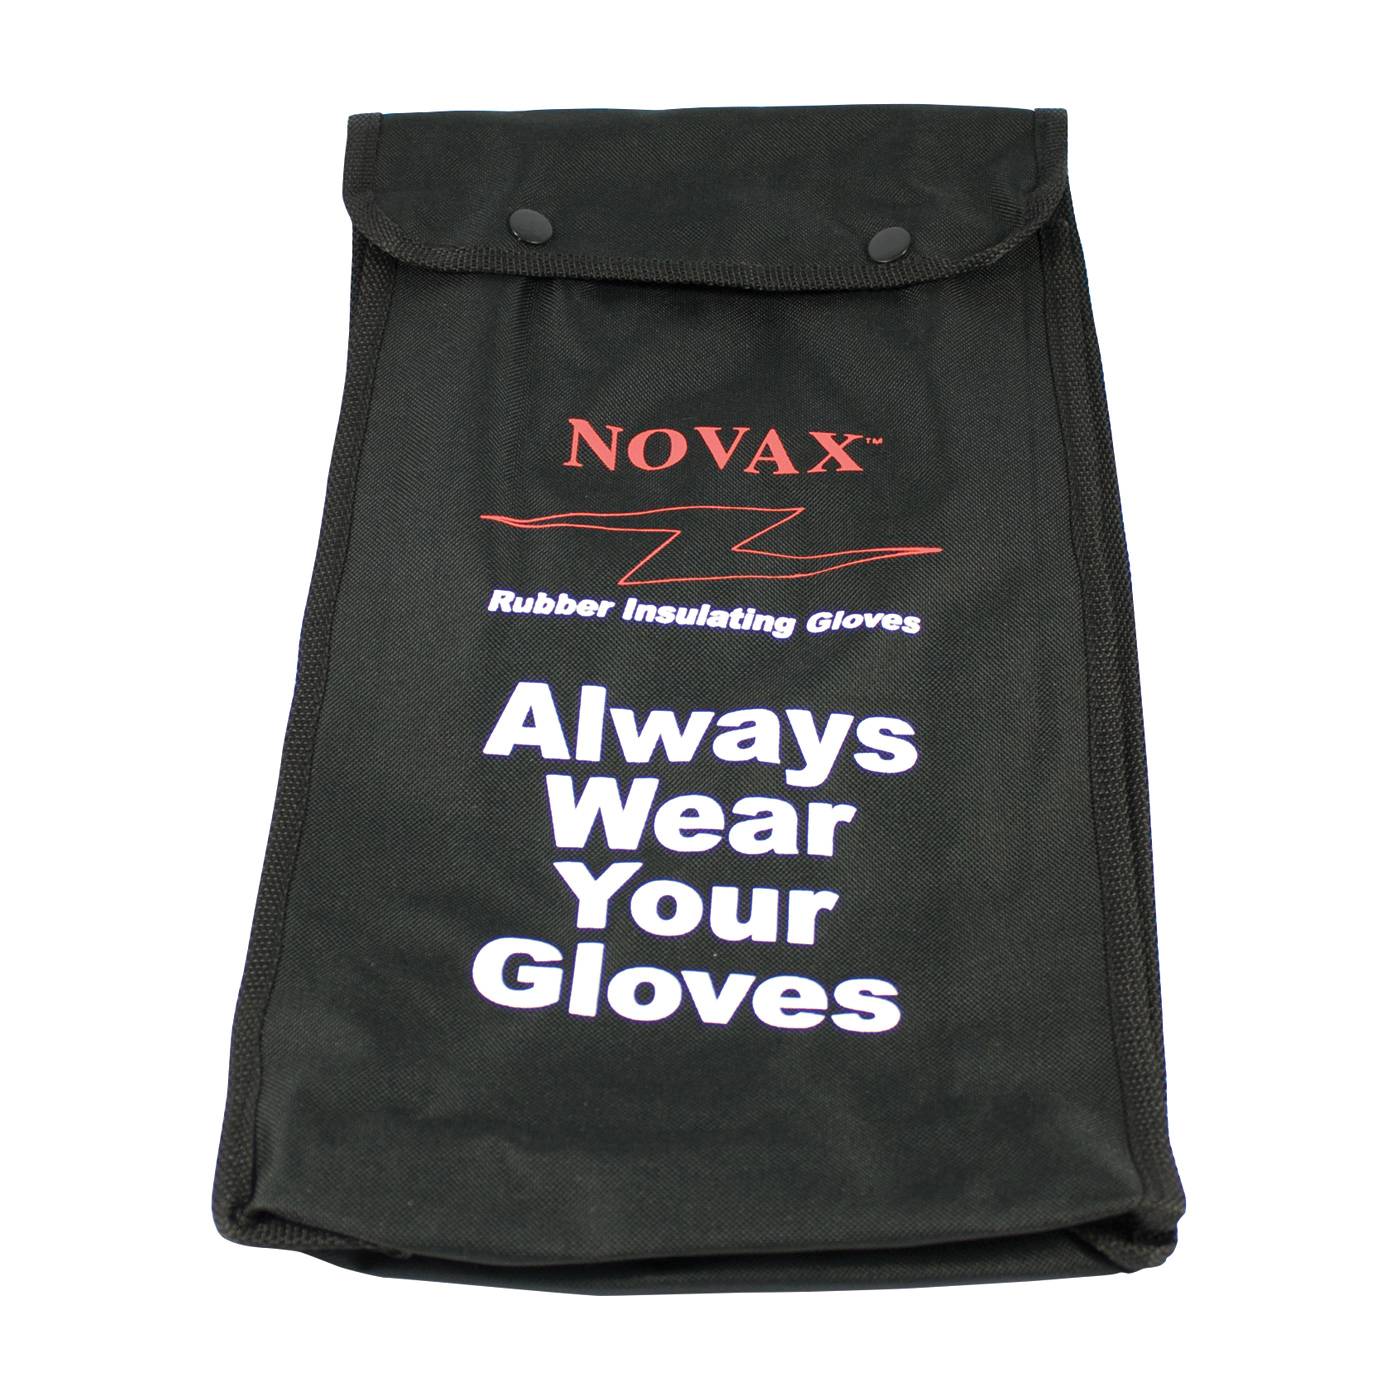 Novax® 148-2142 Protective Bag, Plastic Hook, Snap Closure, For Use With Novax Rubber Insulating Gloves, Nylon, Black with Red/White Lettering (Discontinued by Manufacturer)